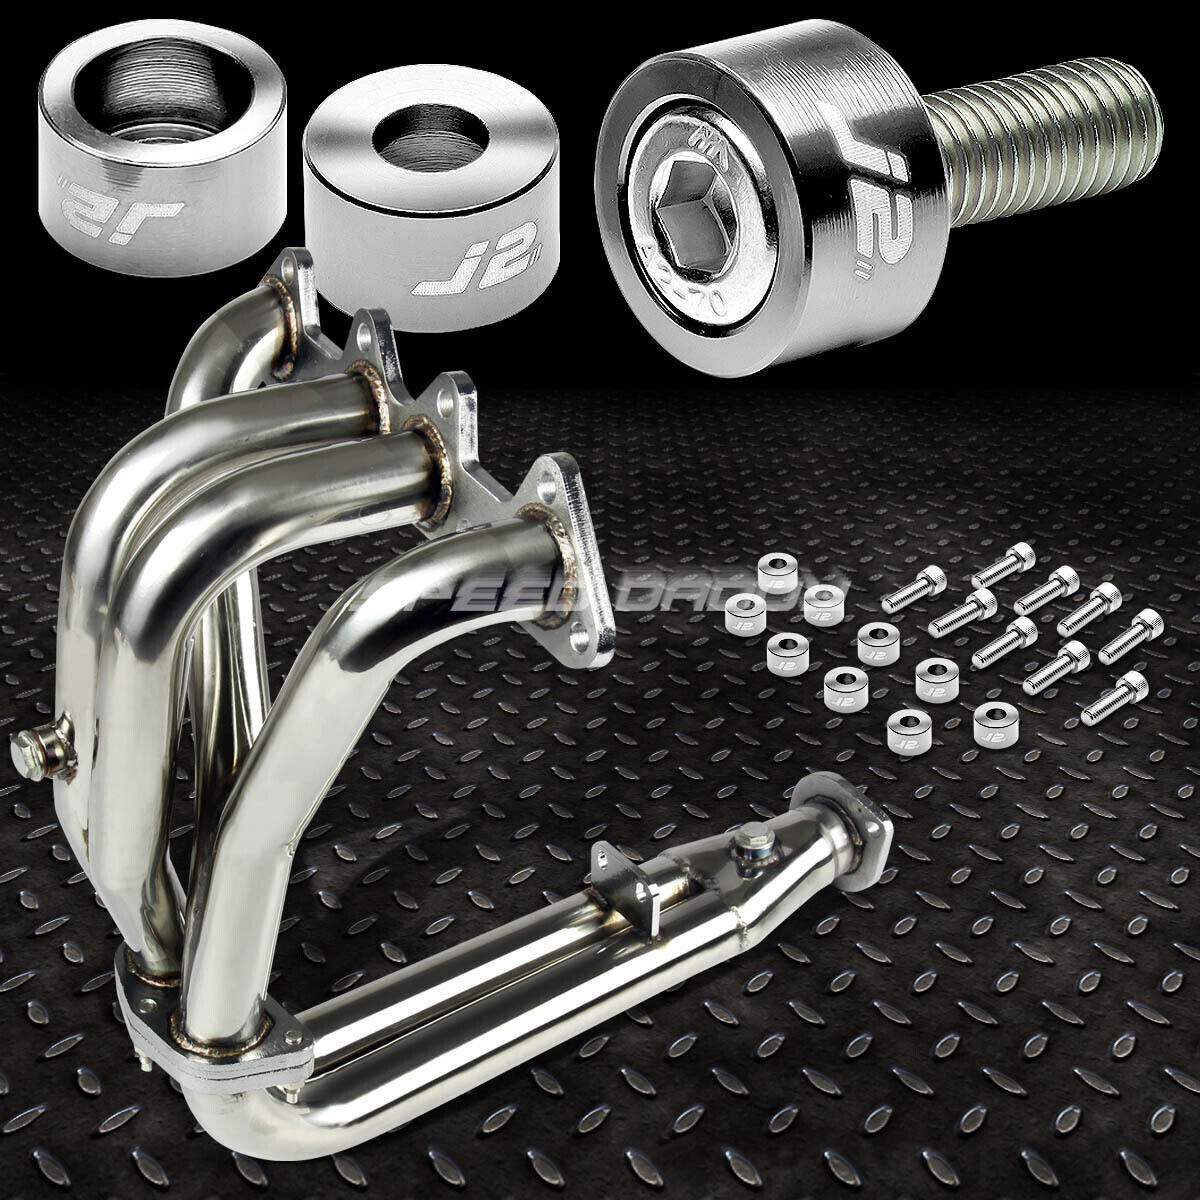 J2 For Accord Cd F22 Stainless Exhaust Manifold Header+Silver Washer Cup Bolt